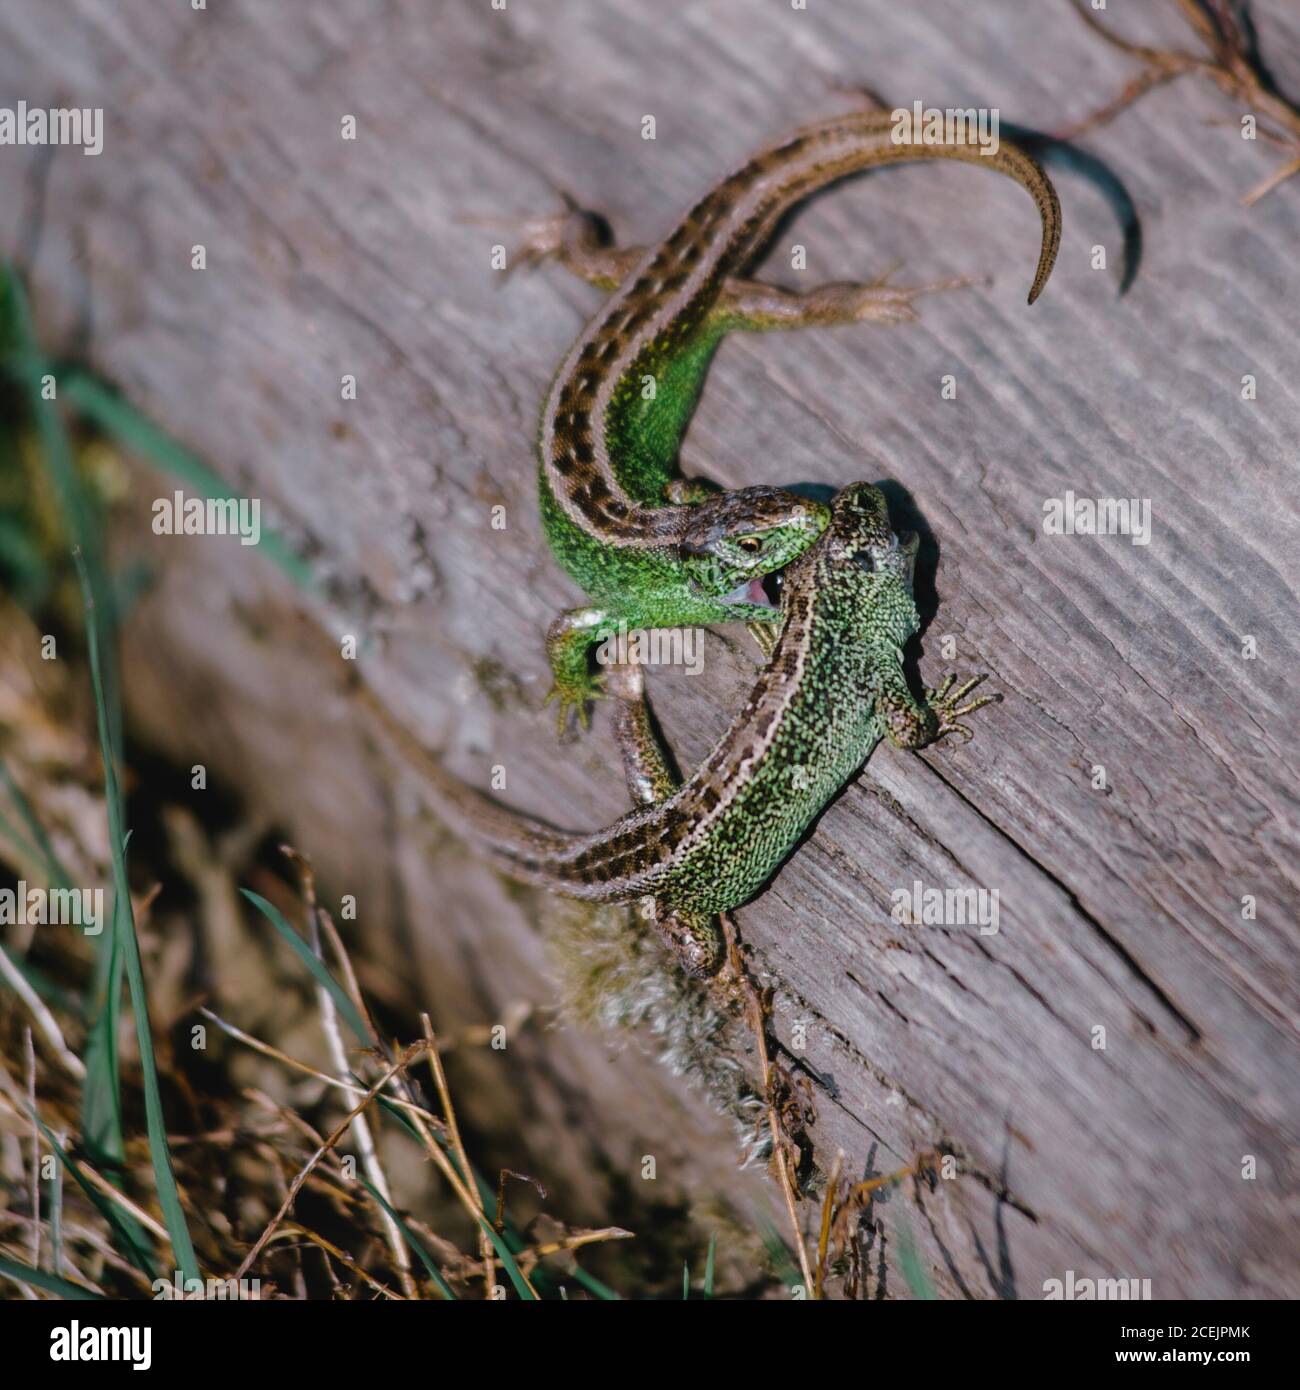 Closeup view of green lacertian biting other standing on dry tree in grass Stock Photo